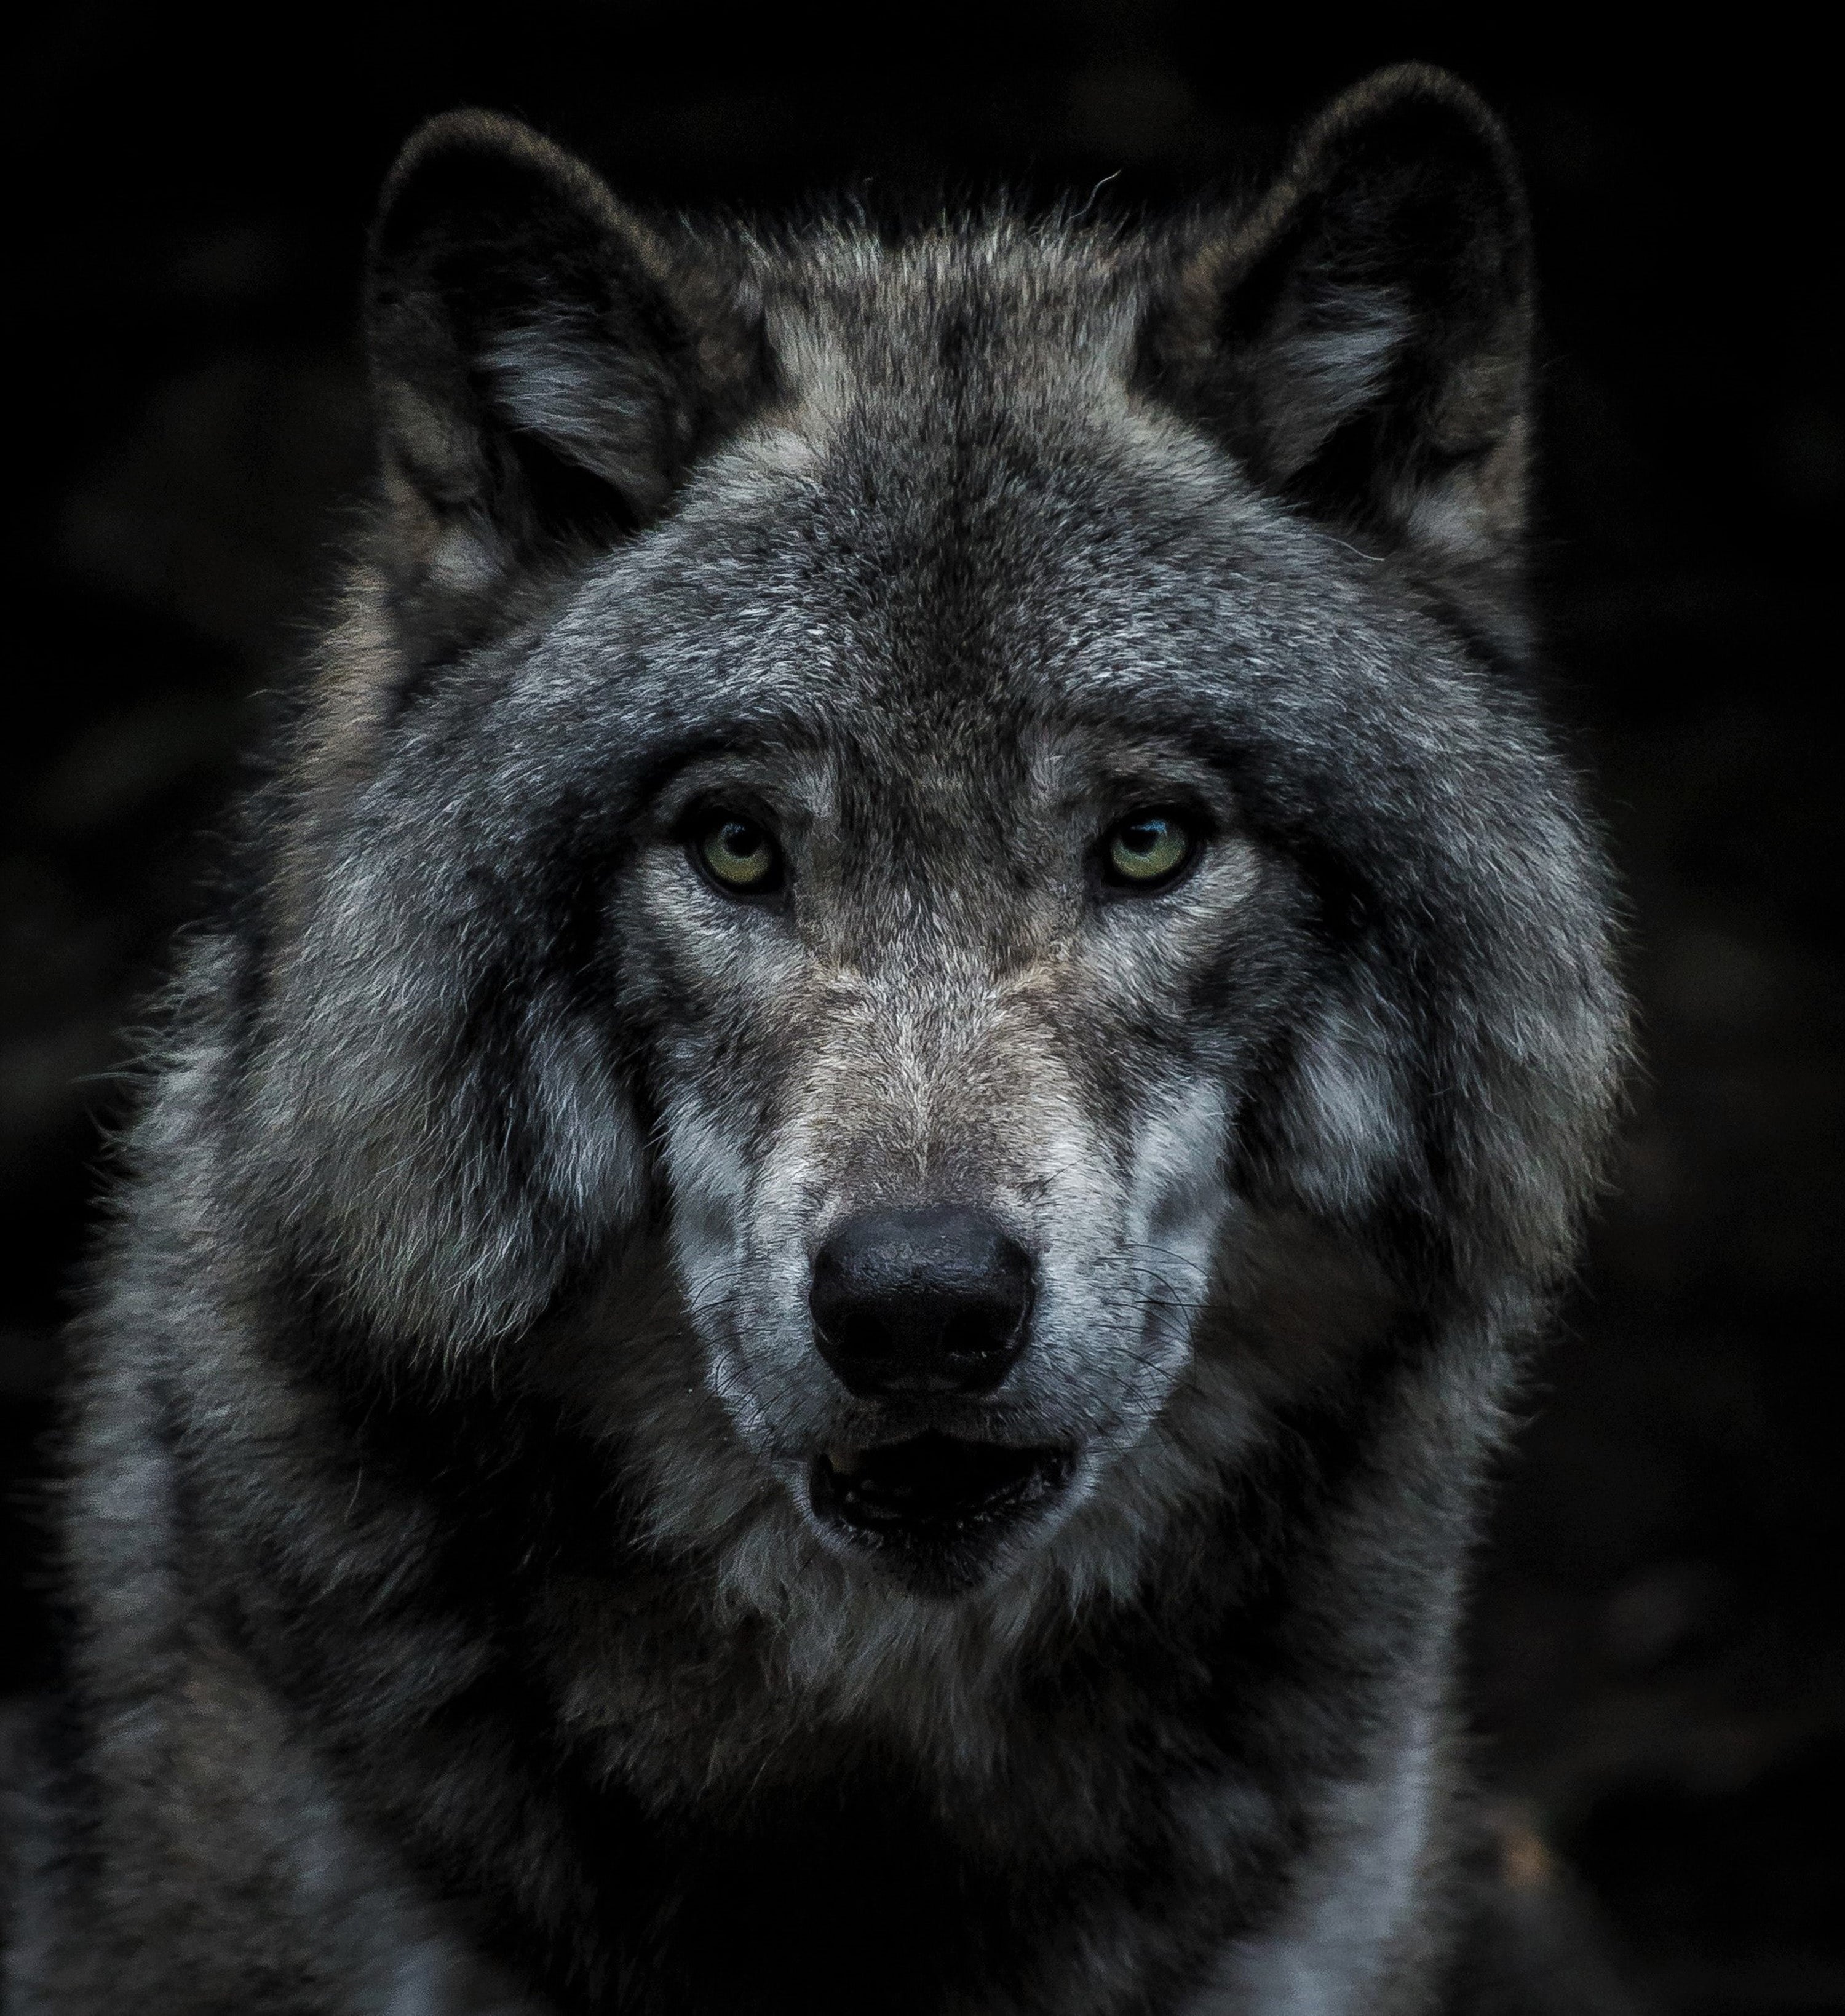 Image of a wolf's face